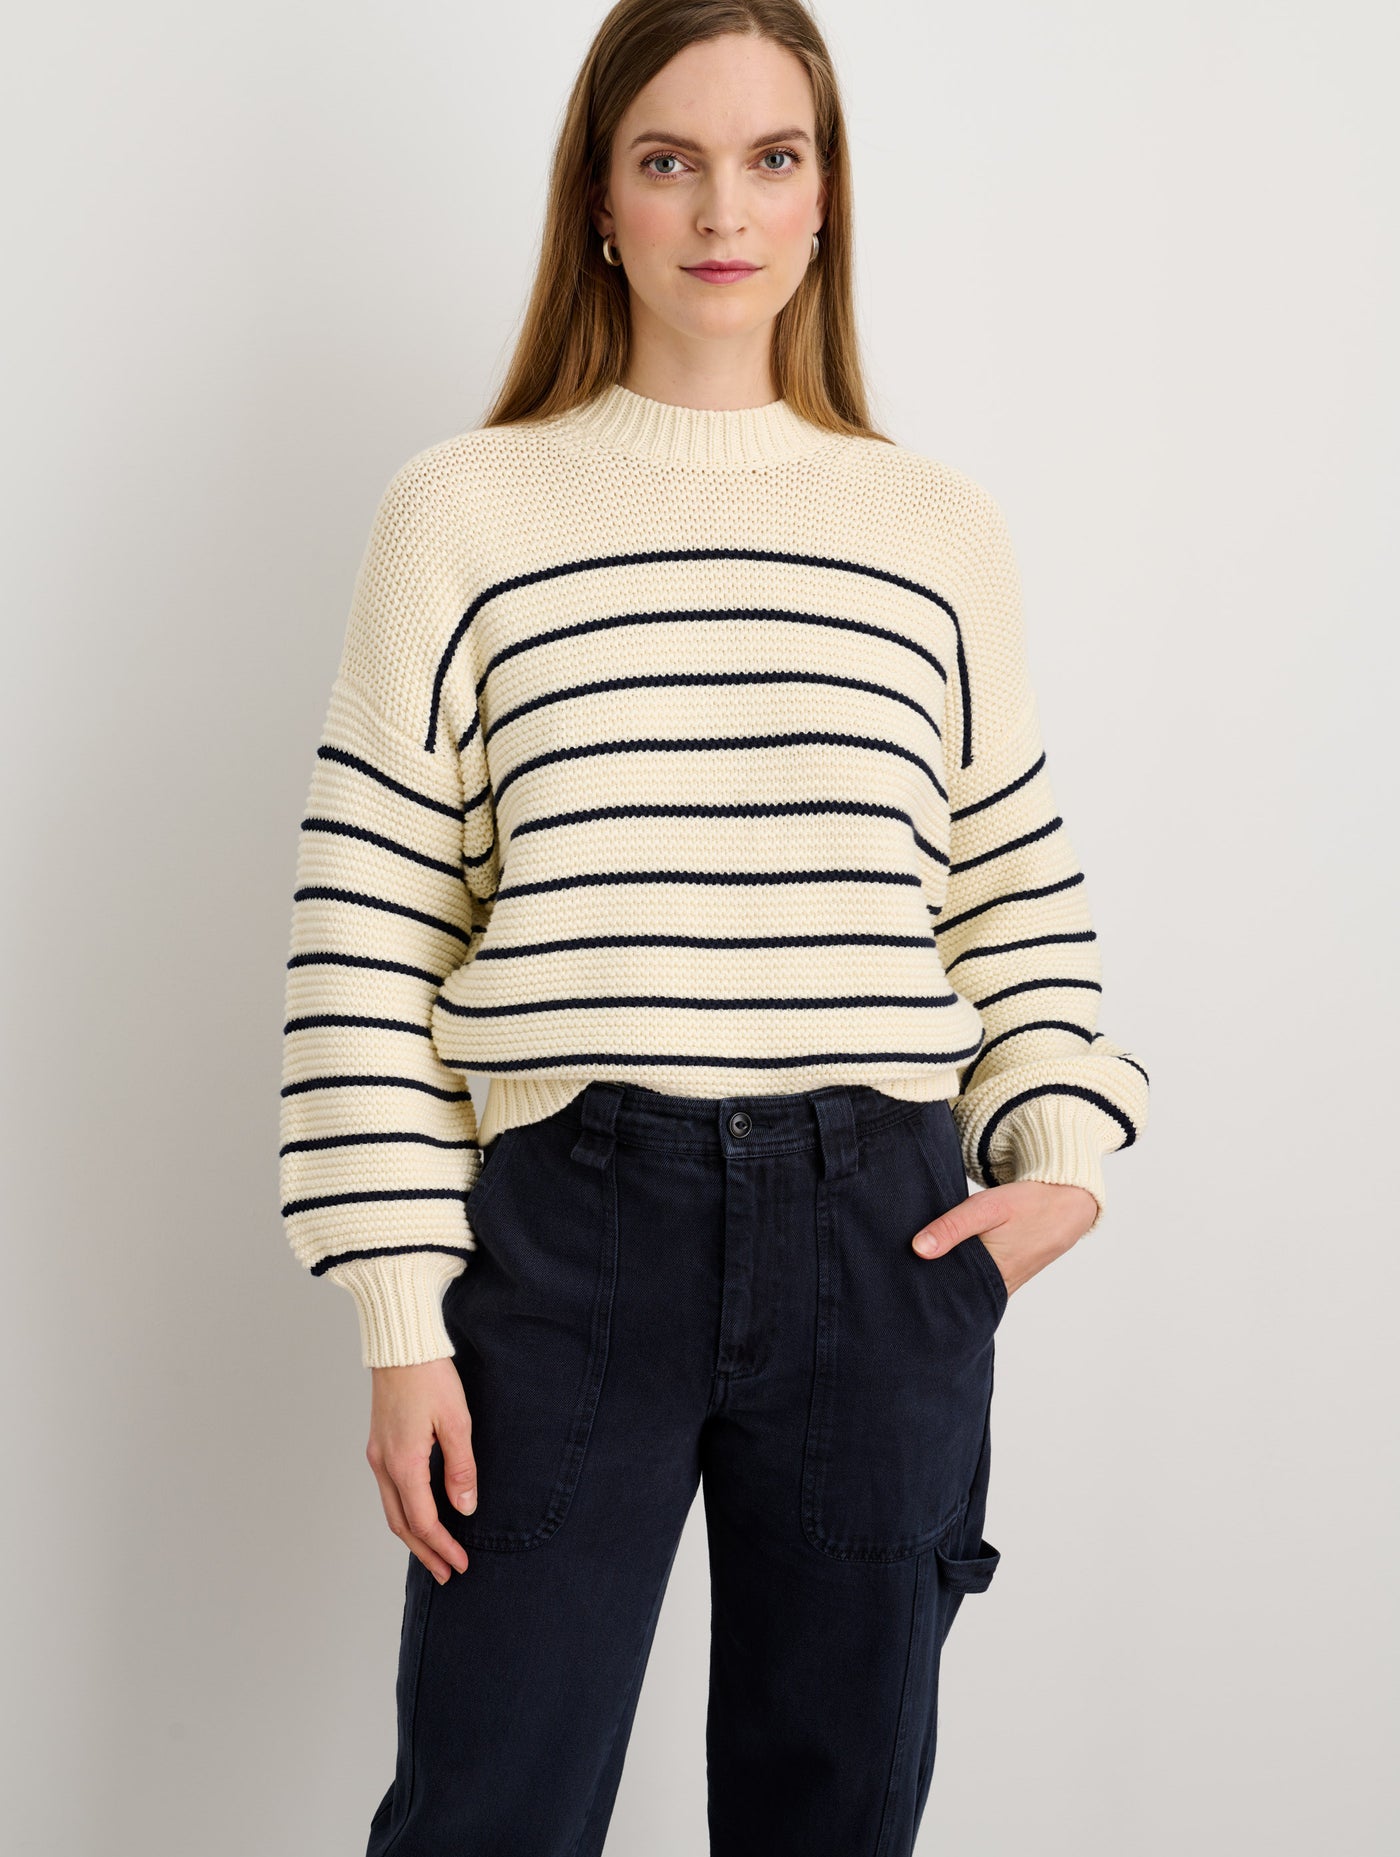 Never Give Up. (Stripe) XSmall